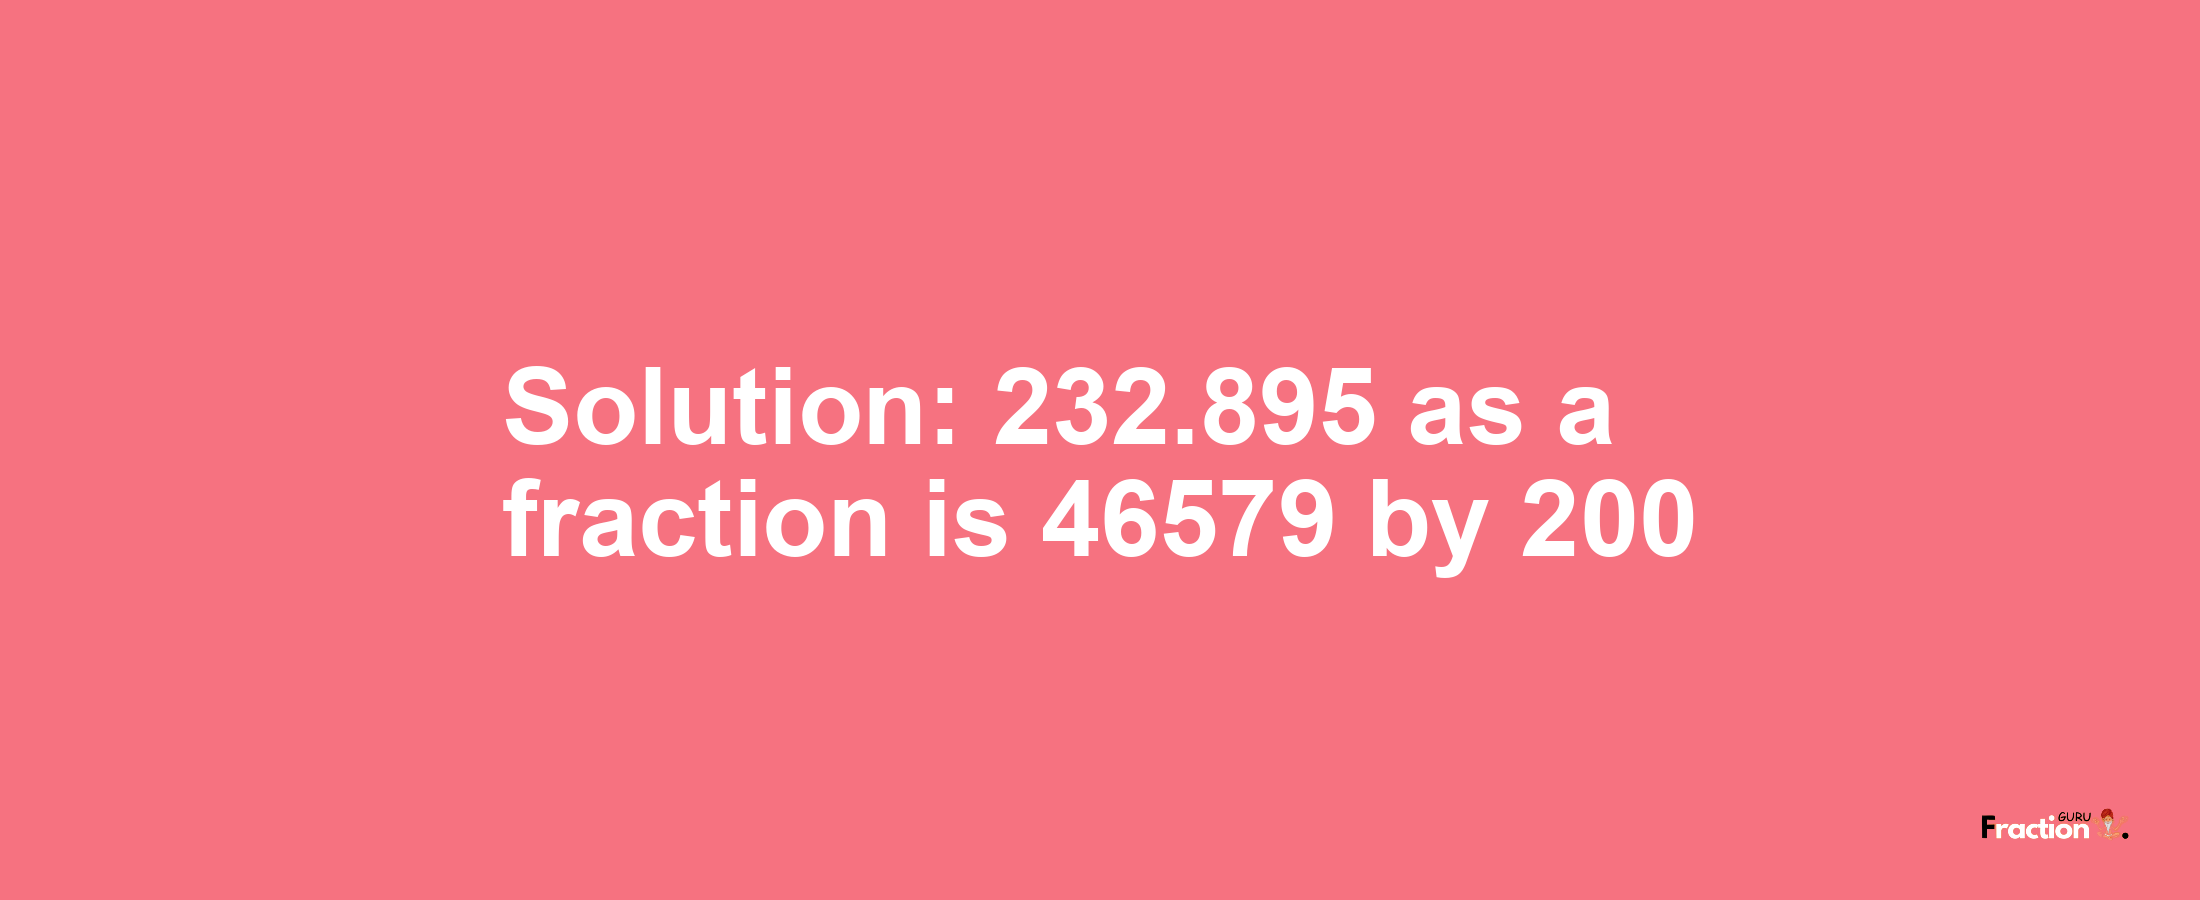 Solution:232.895 as a fraction is 46579/200